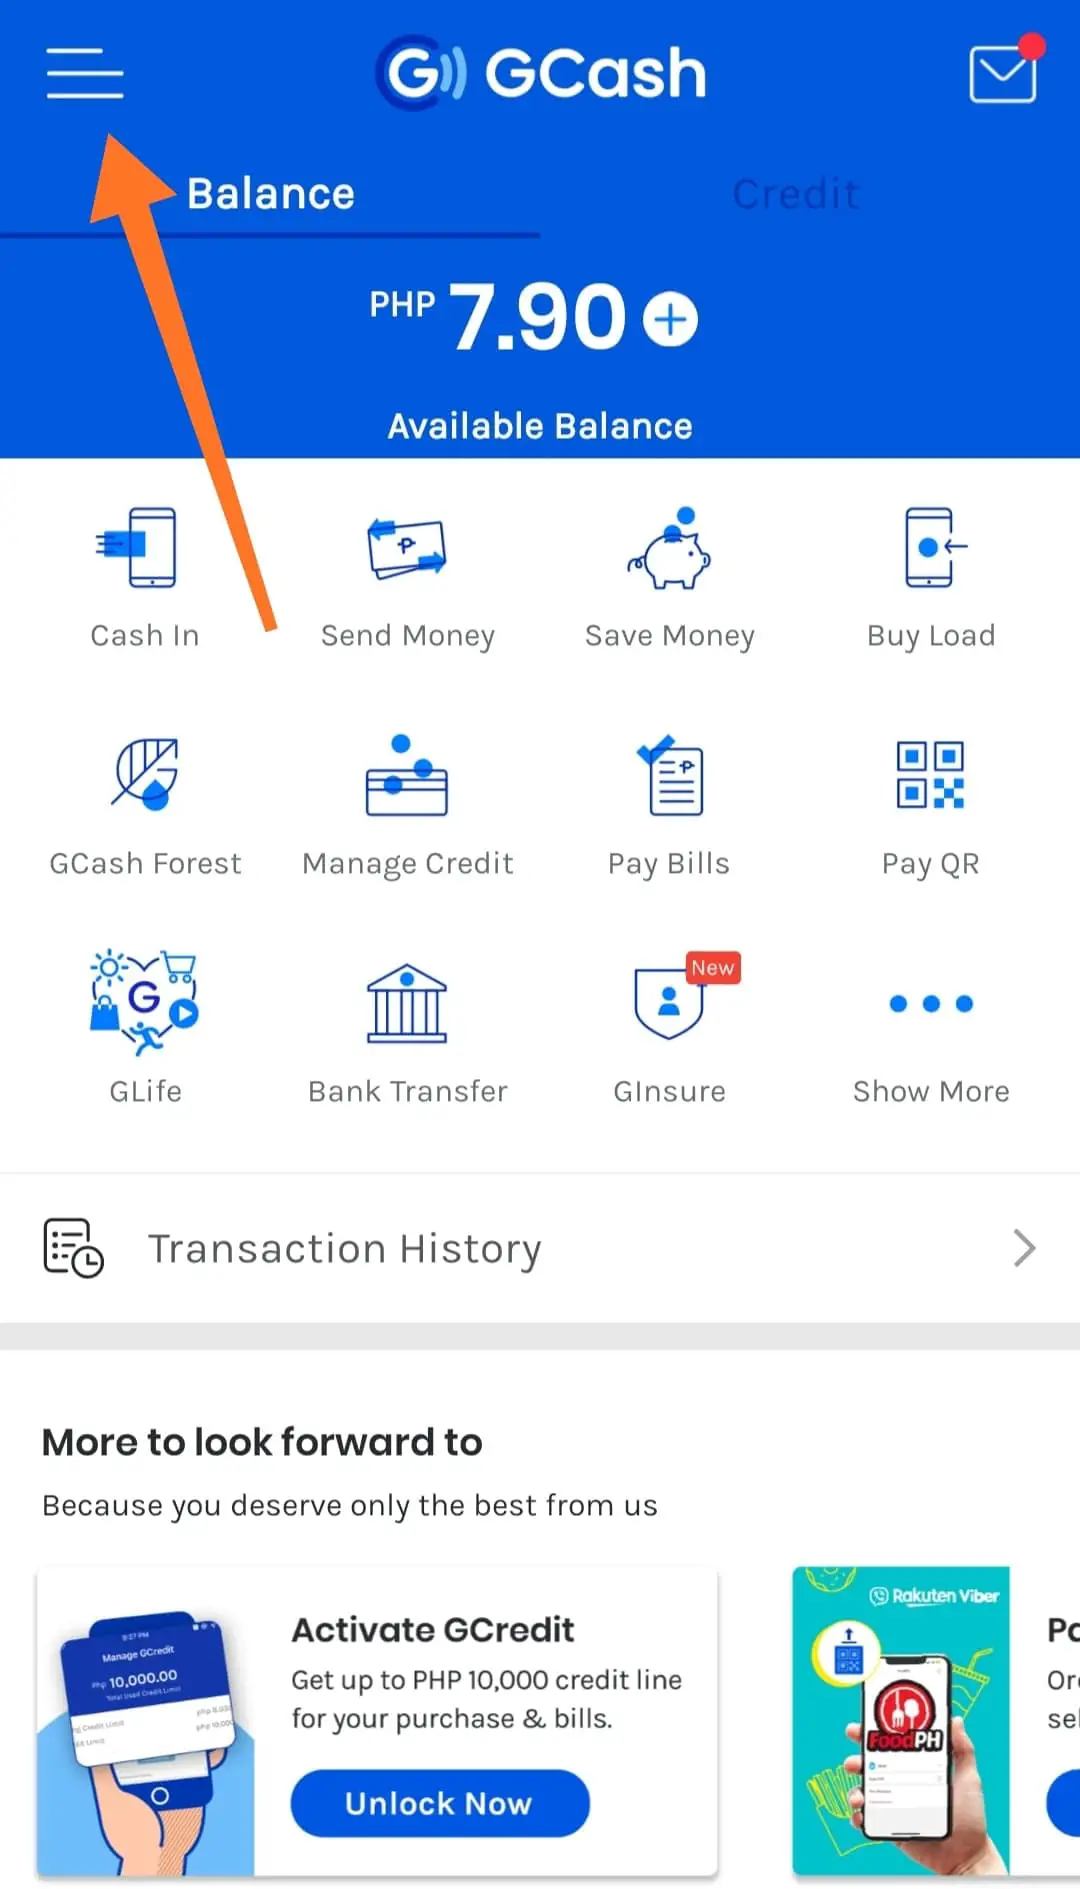 live chat in the GCash app